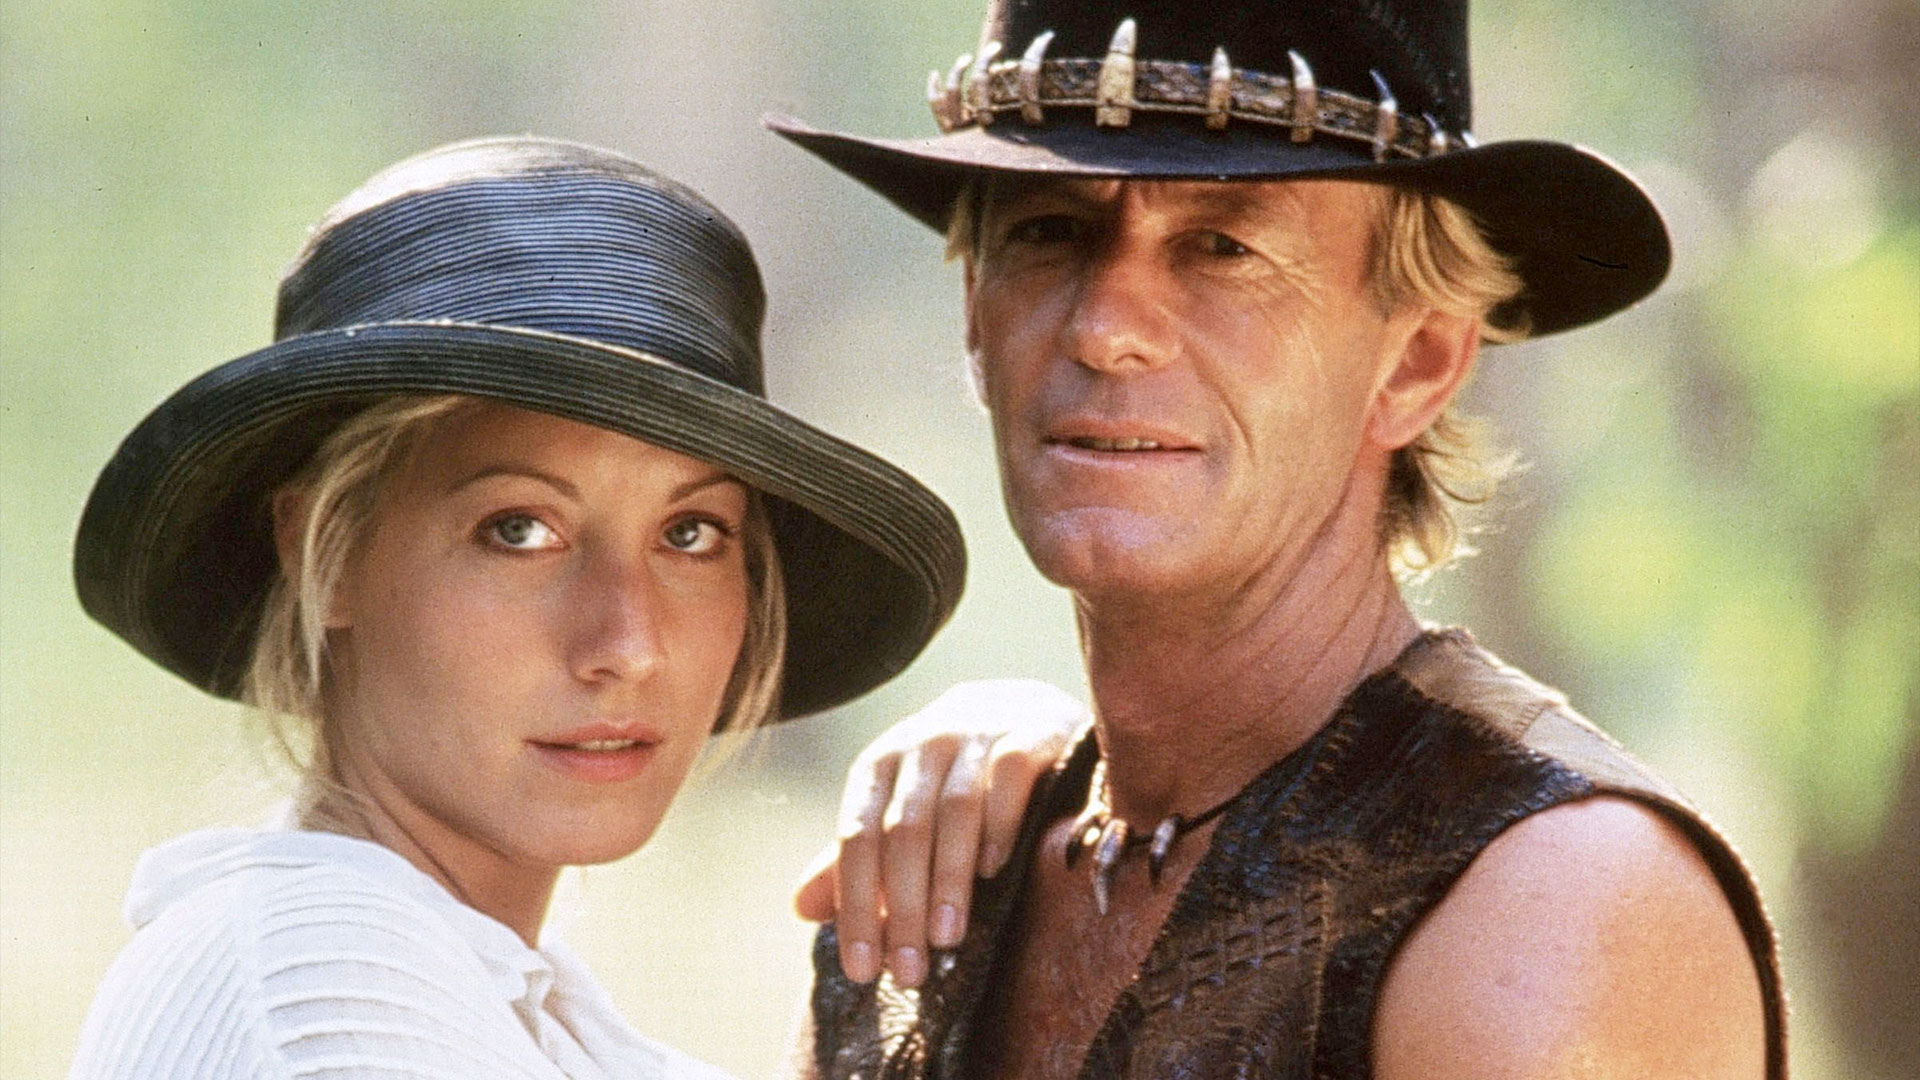 Episode 228: Crocodile Dundee (1986) - The Test of Time